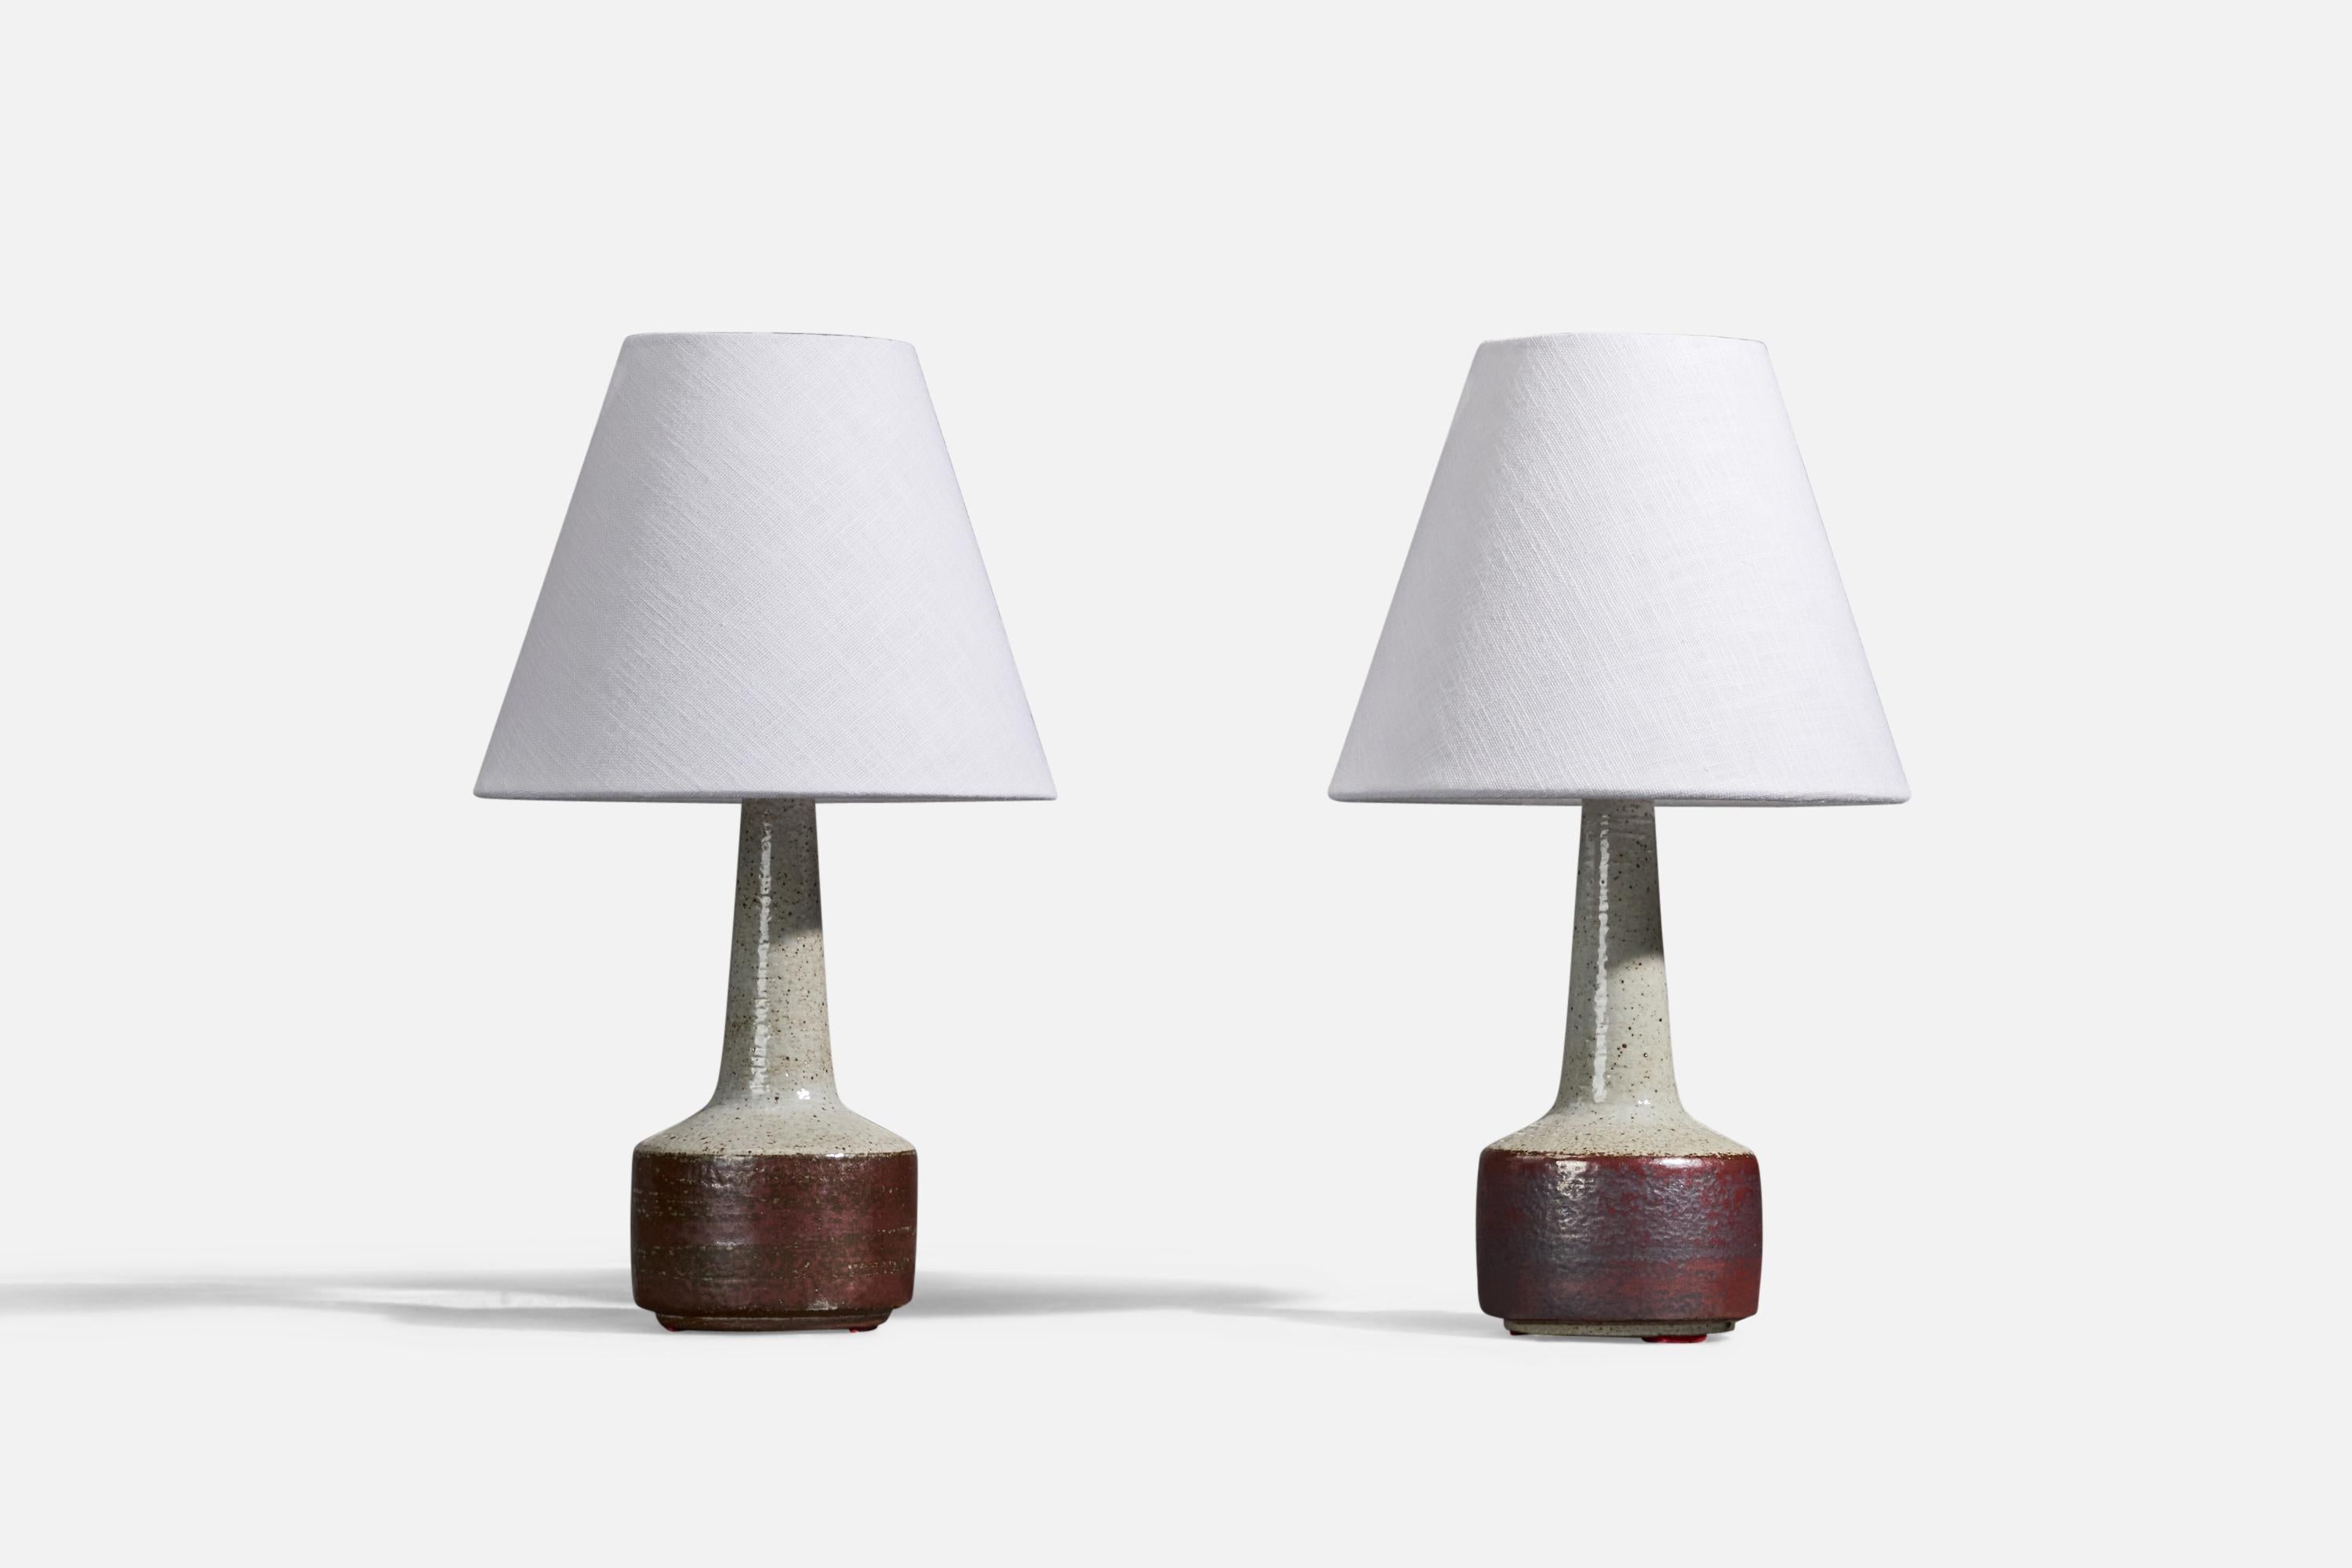 A pair of ceramic table lamps designed by Per & Annelise Linneman-Schmidt and produced by Palshus, in Sengeløse, Denmark.

Lamps with signature to underside. 

Stated dimensions are without shades. 

Dimensions of Lamp (inches) : 10.93 x 3.95 x 3.95